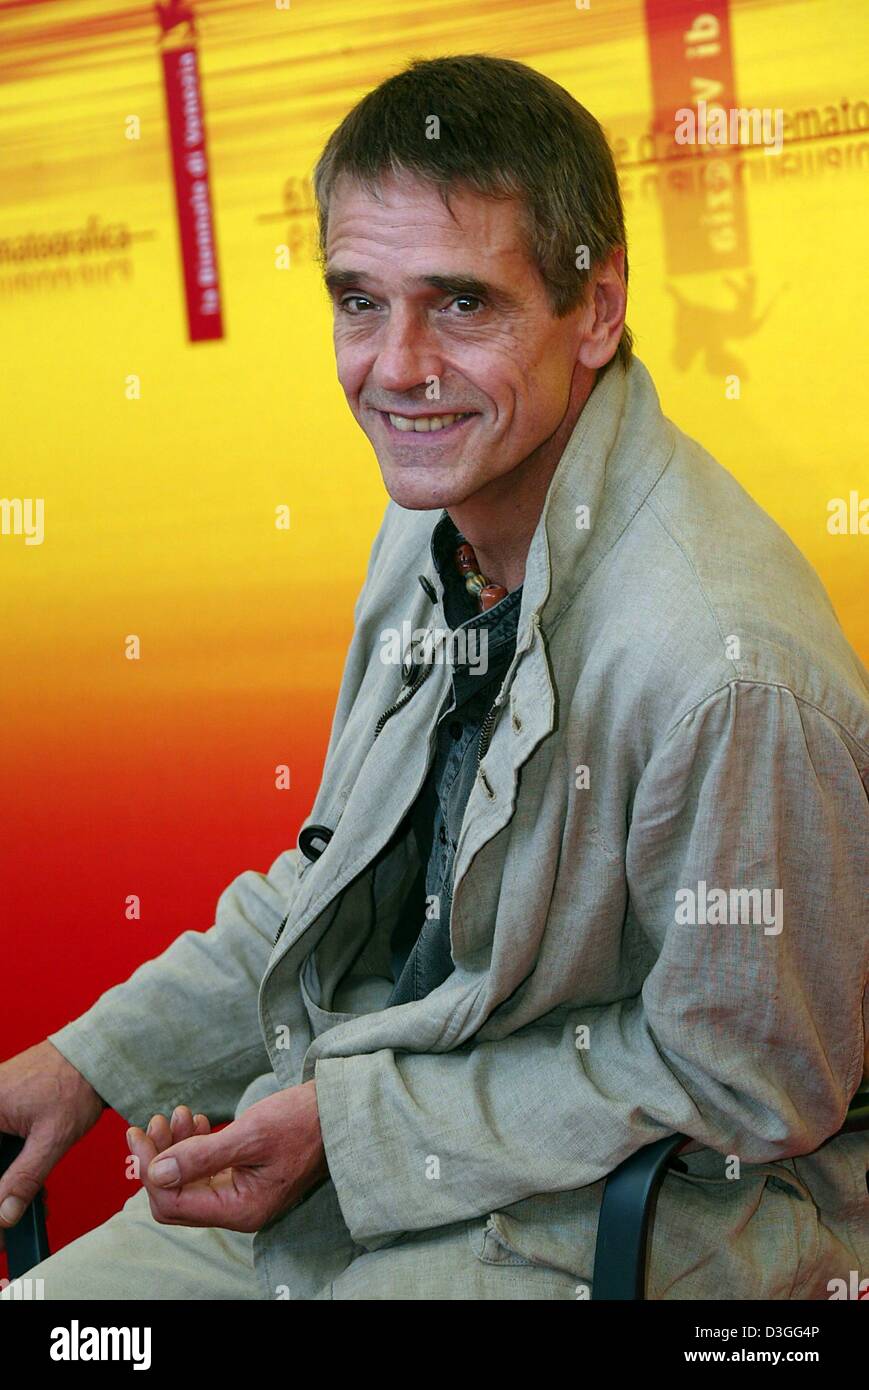 (dpa) - British actor Jeremy Irons pictured during a press conference for his film 'The Merchant of Venice', which runs out of competition at the 61st Venice Film Festival, Italy, 4 September 2004. Stock Photo